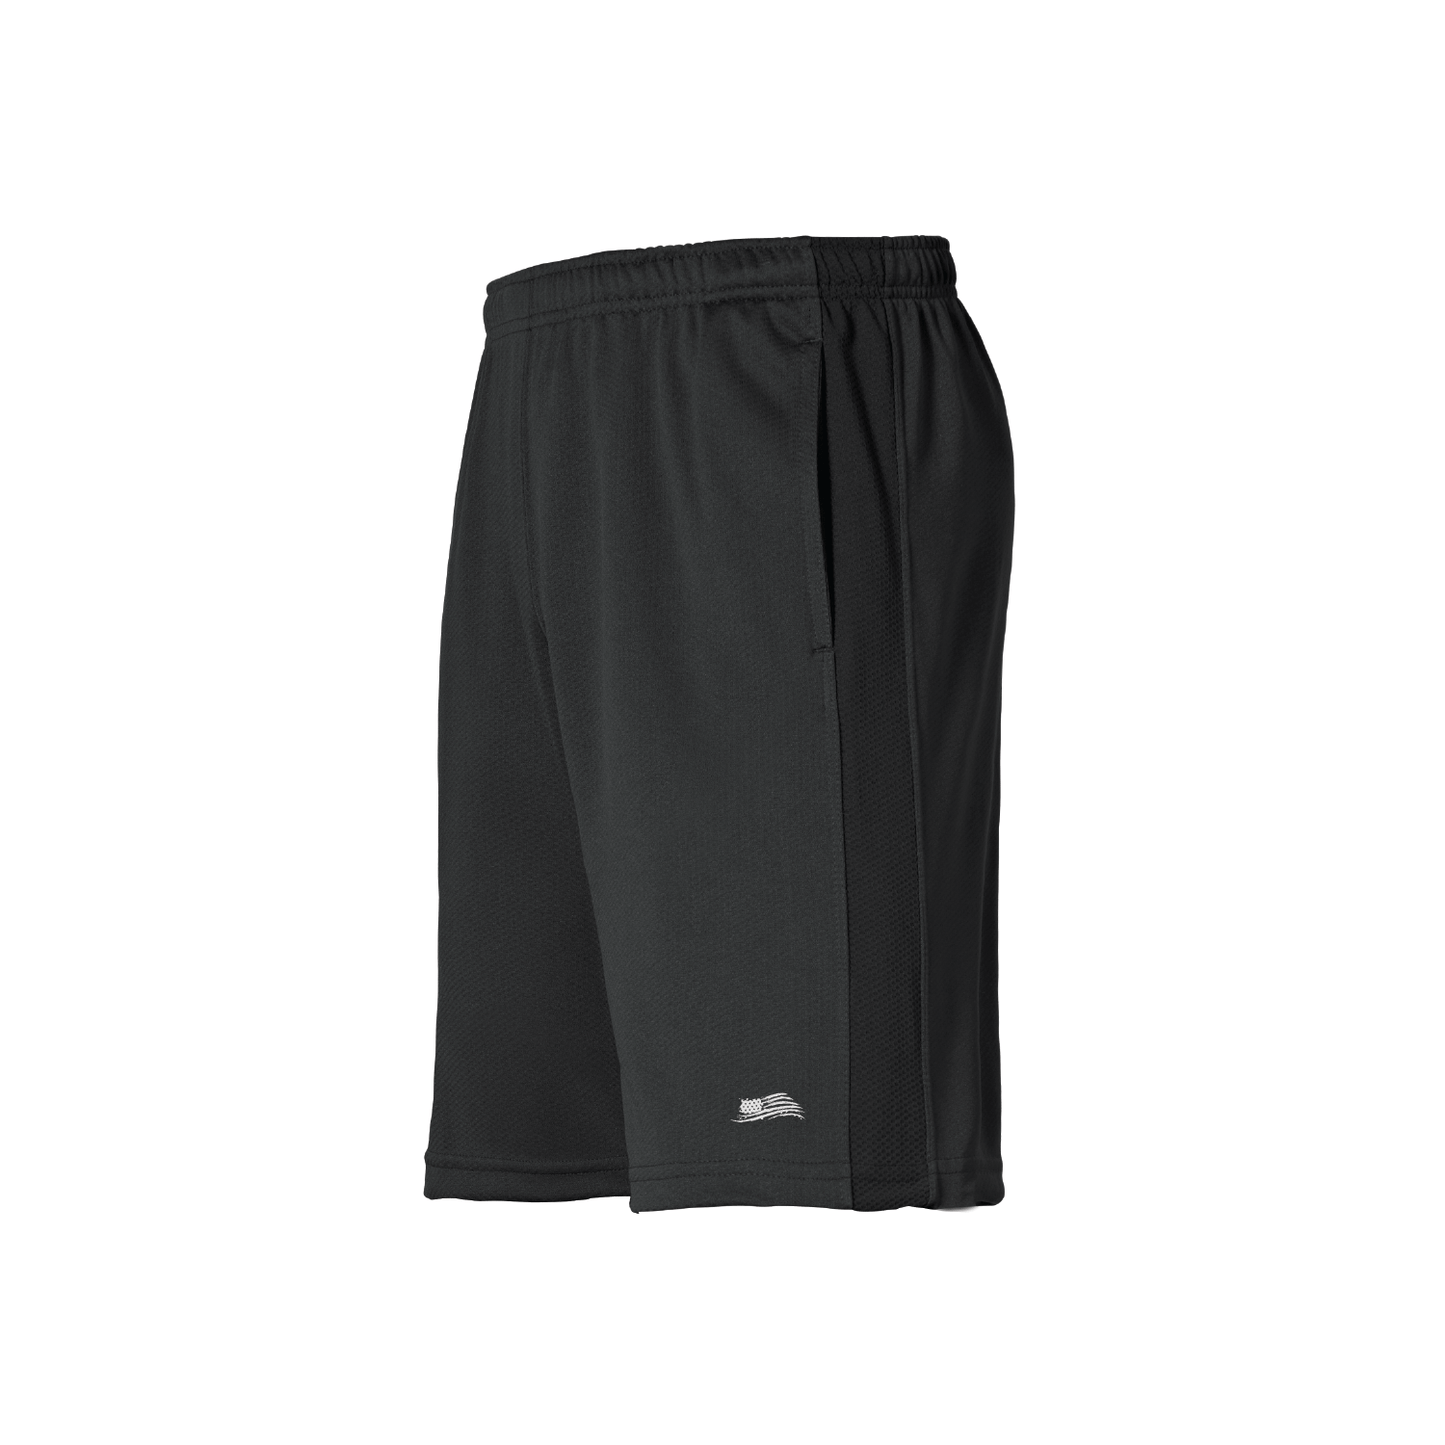 Authentically American Active Short